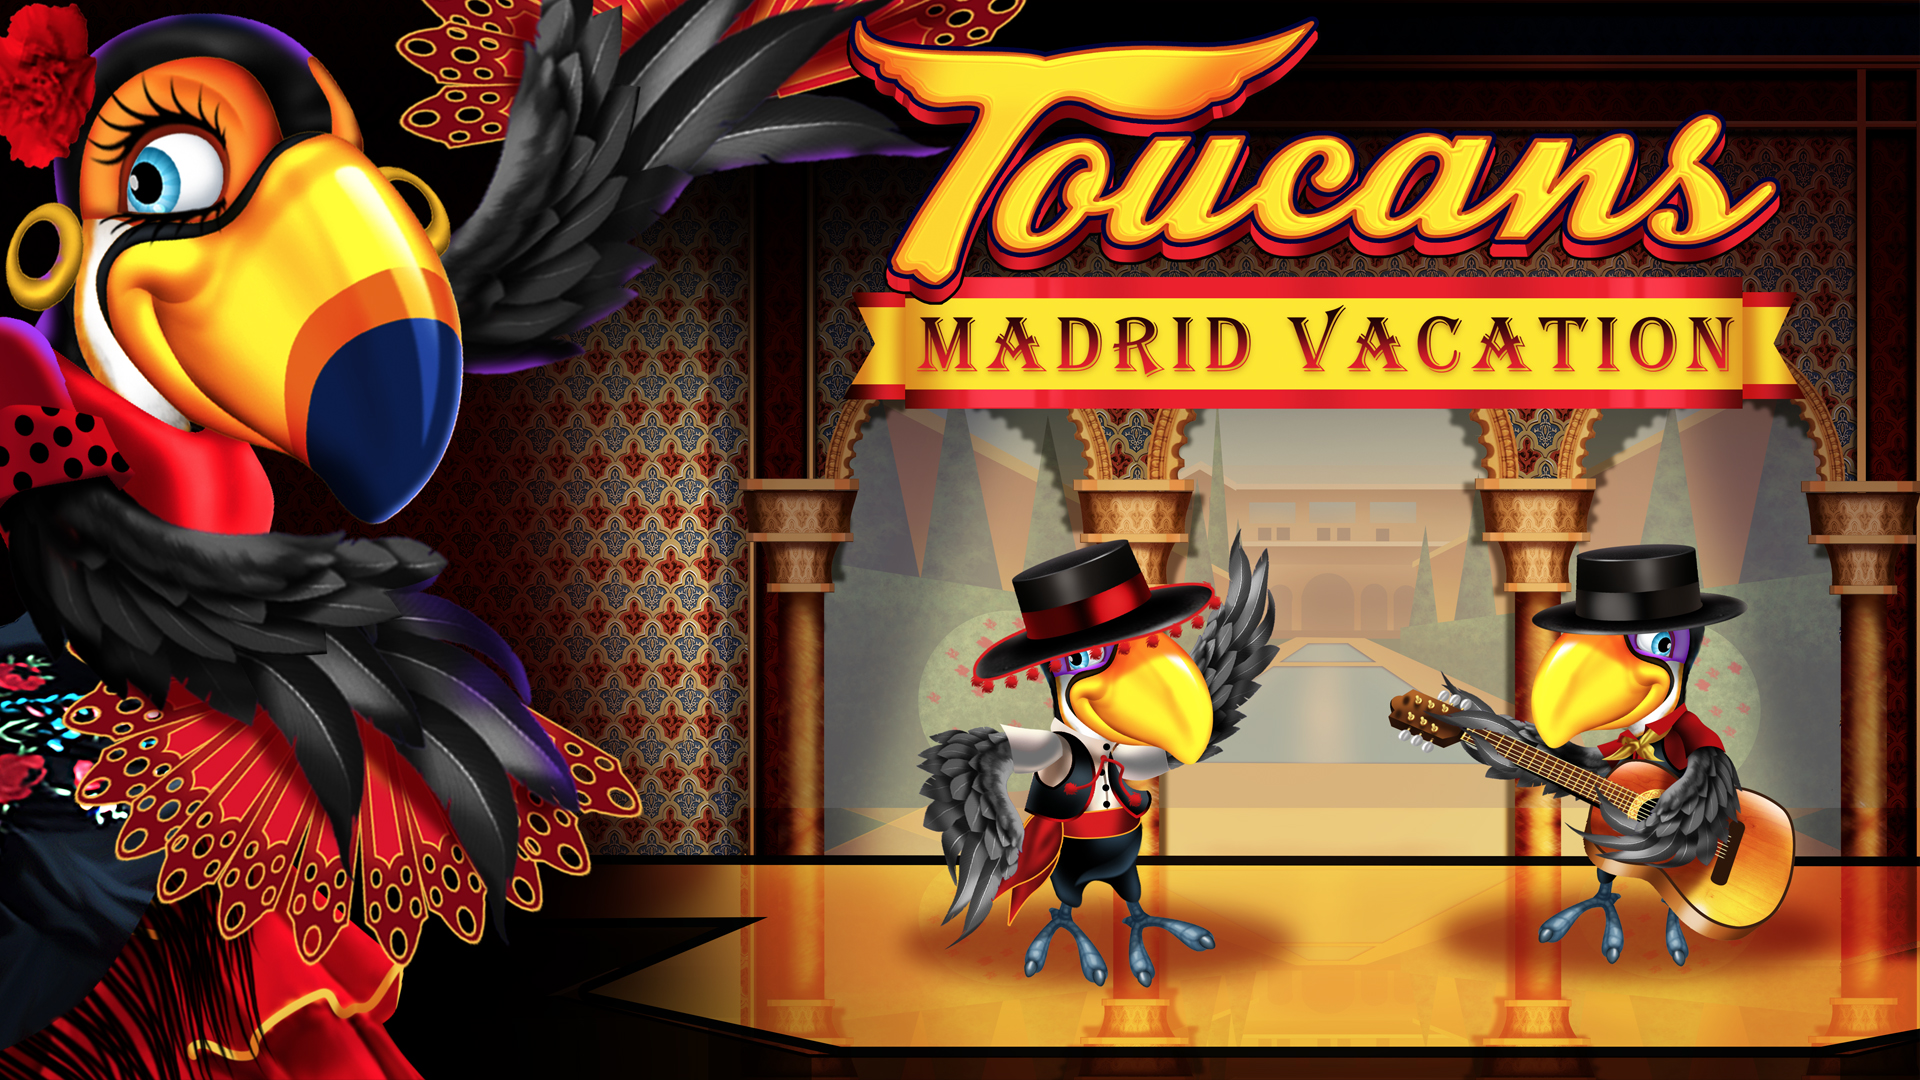 Toucans Madrid Vacation